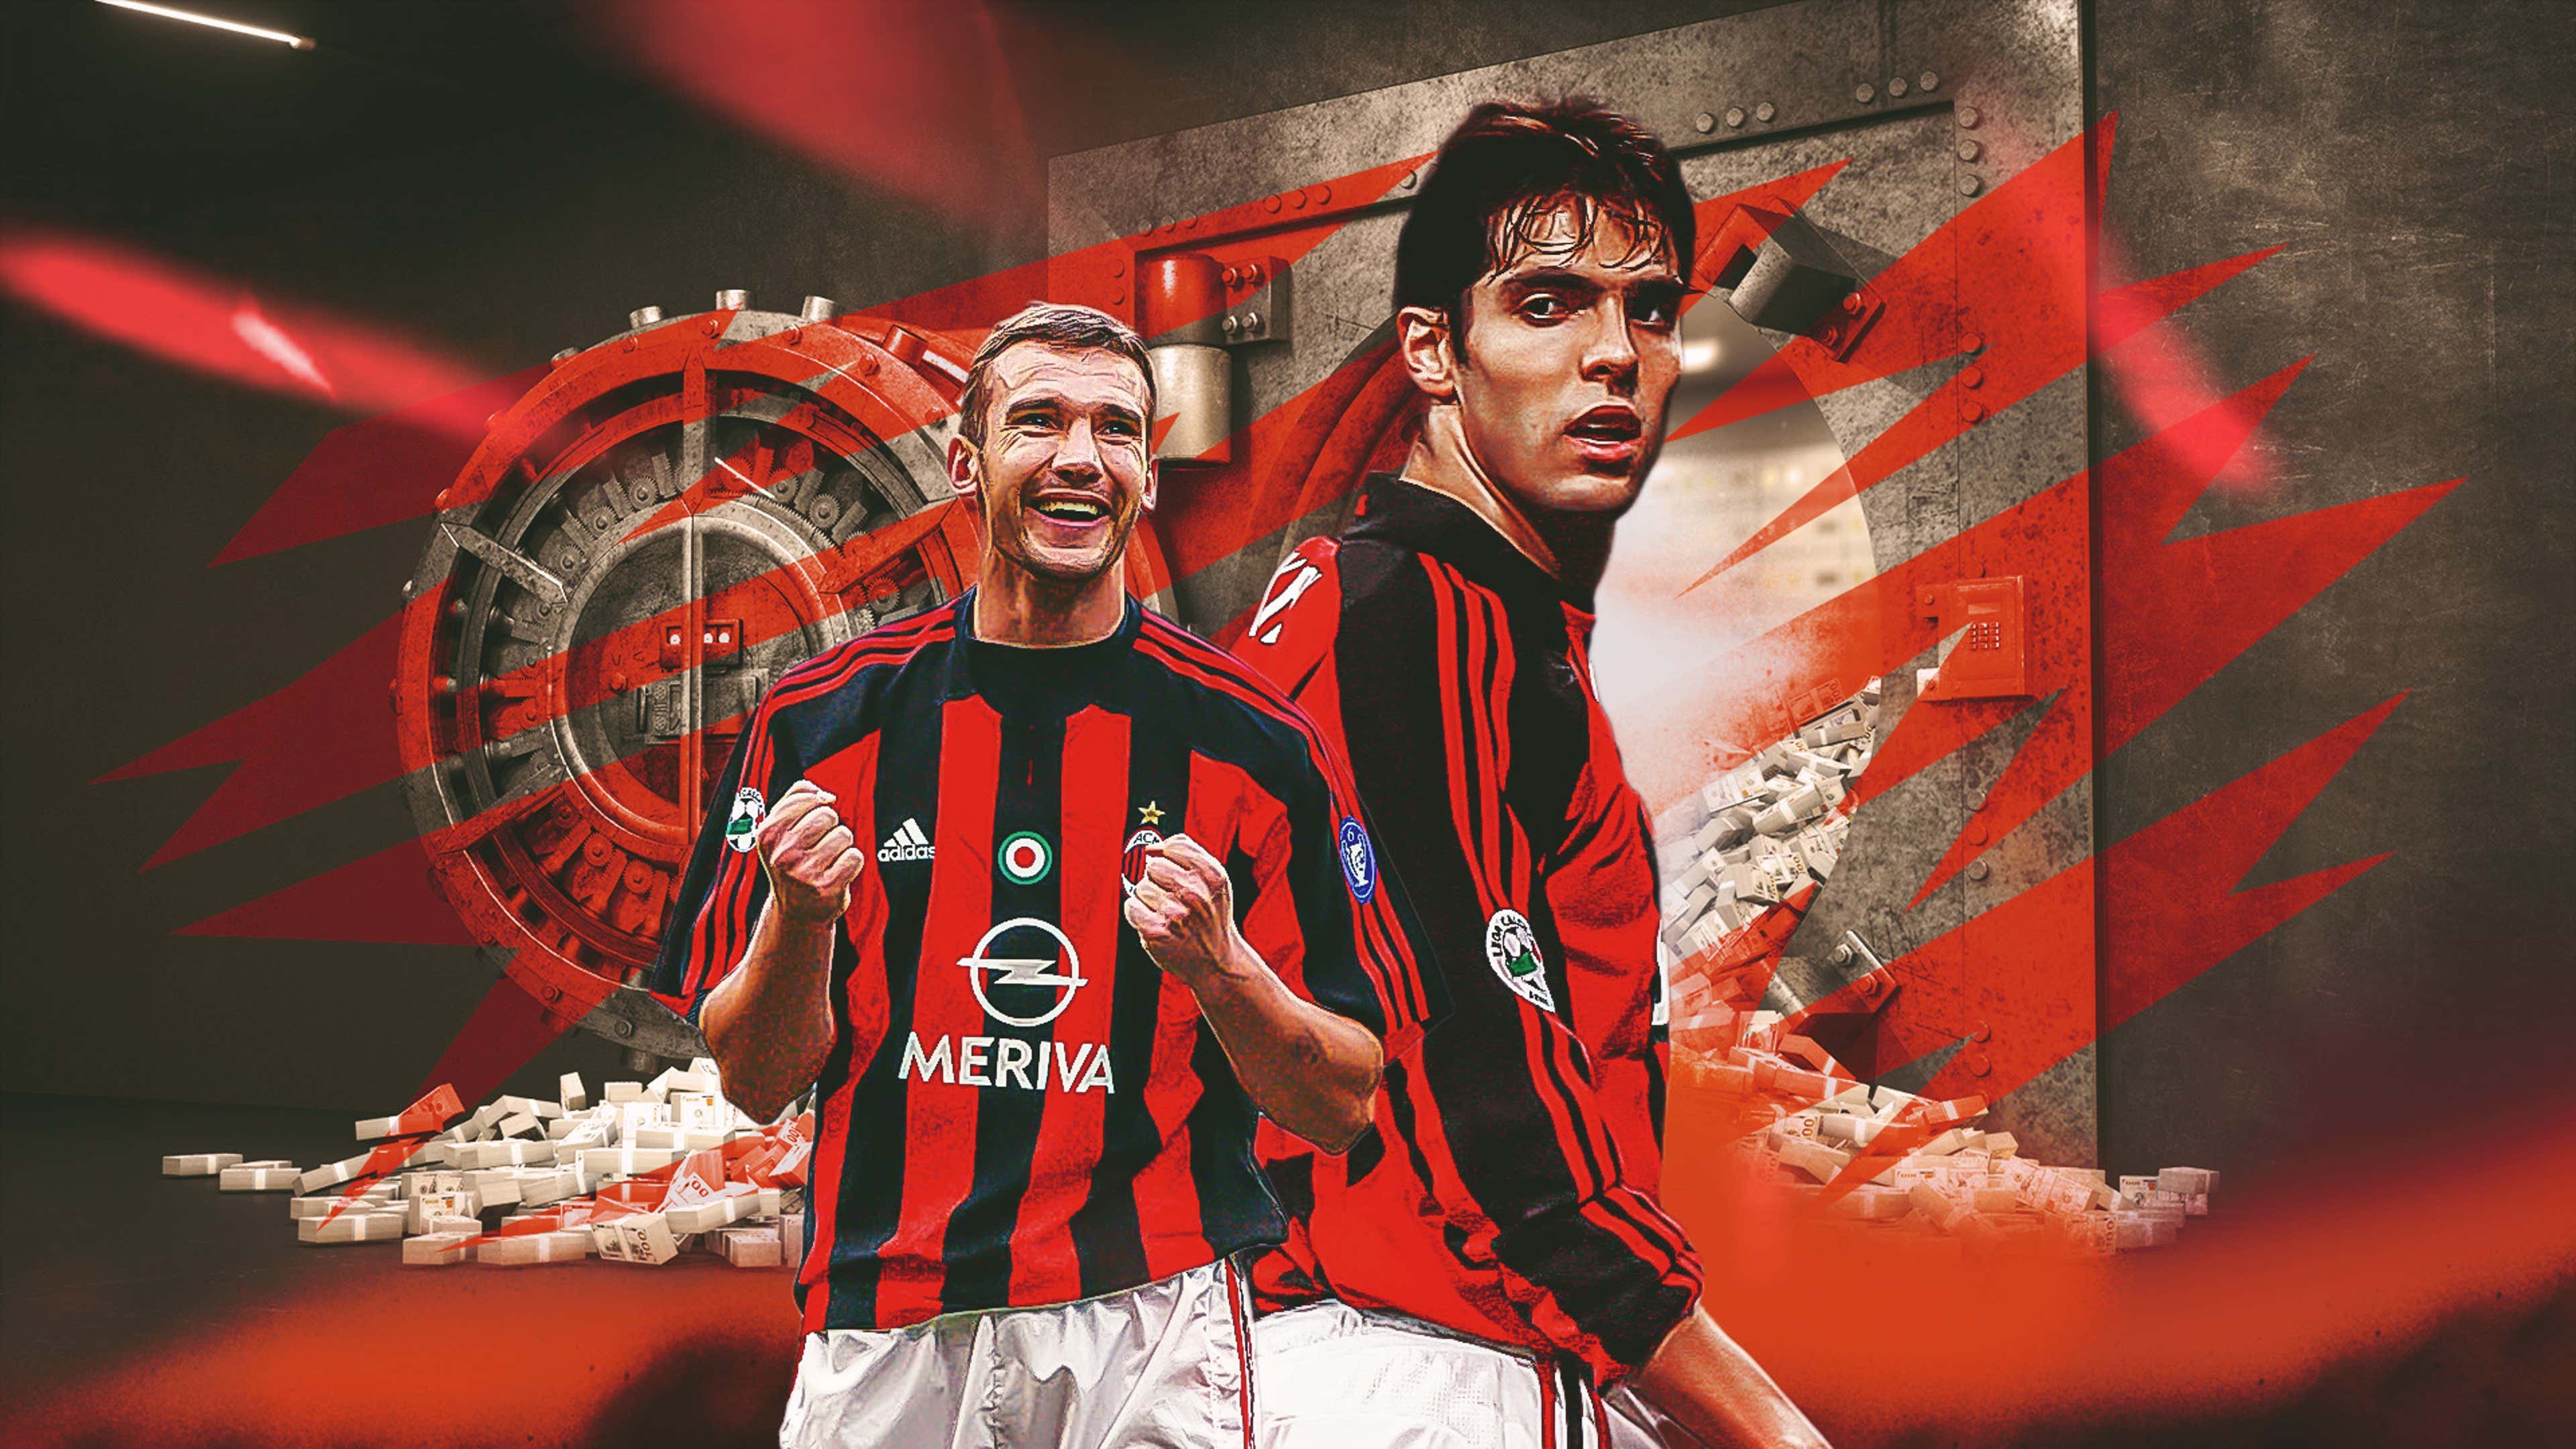 Serie A, 2011-12. Milan. last time (before today) in the